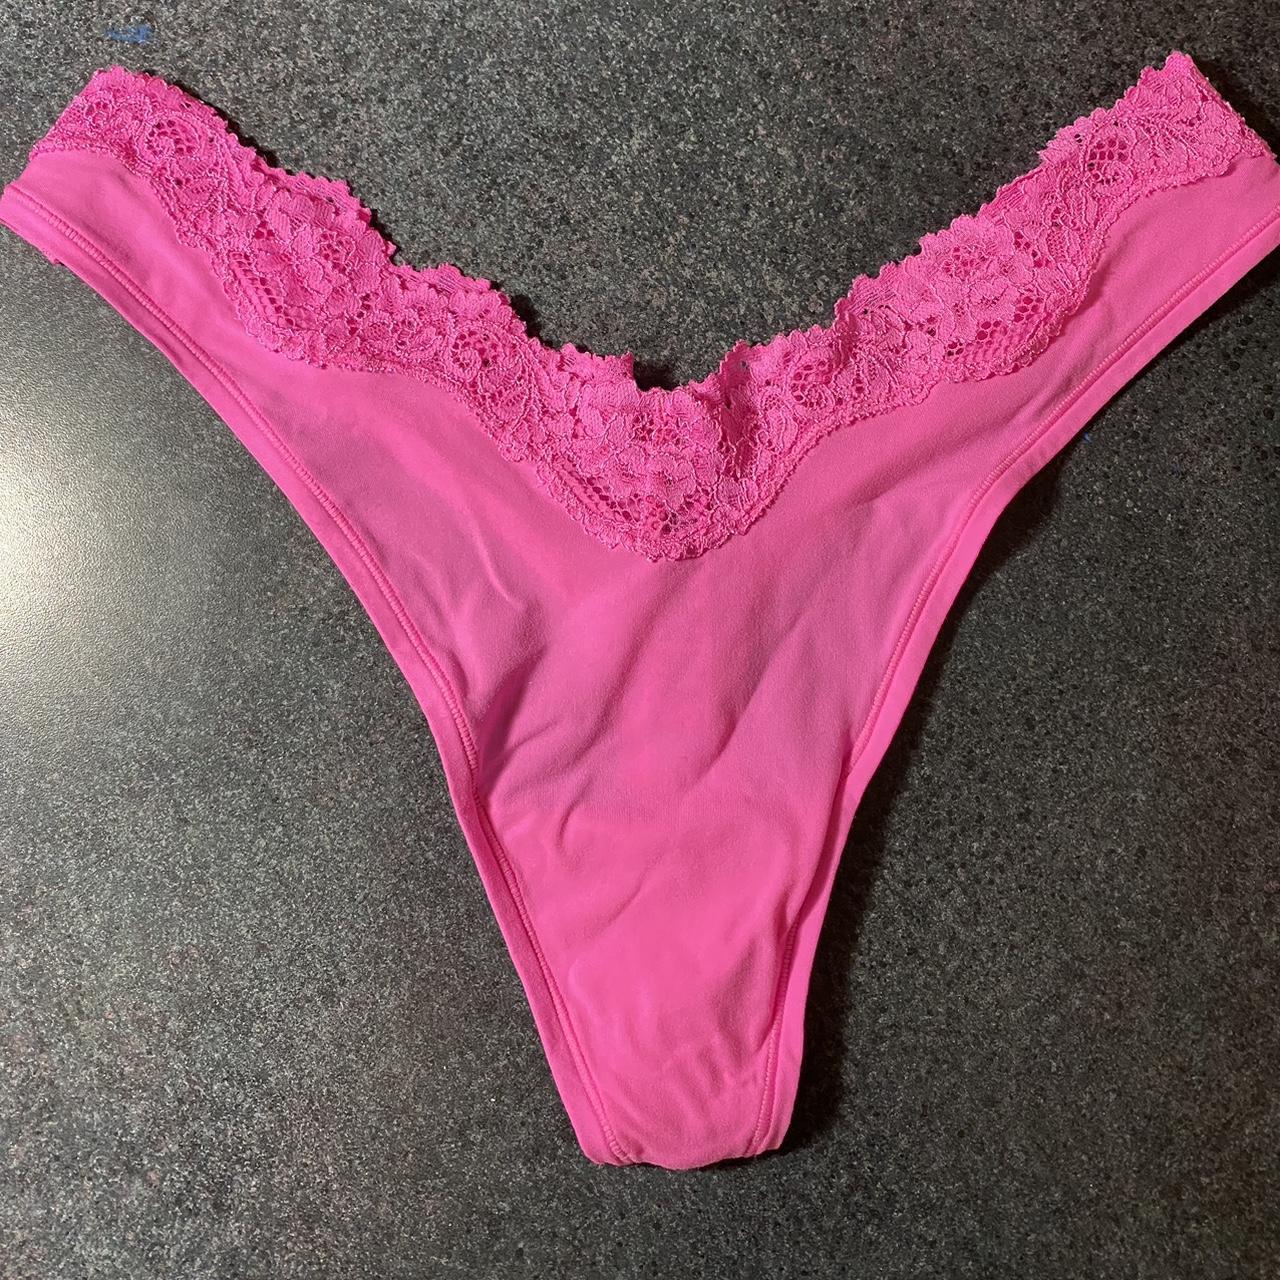 Skims Fits Everybody Lace Dipped Thong Shade Taffy - Depop